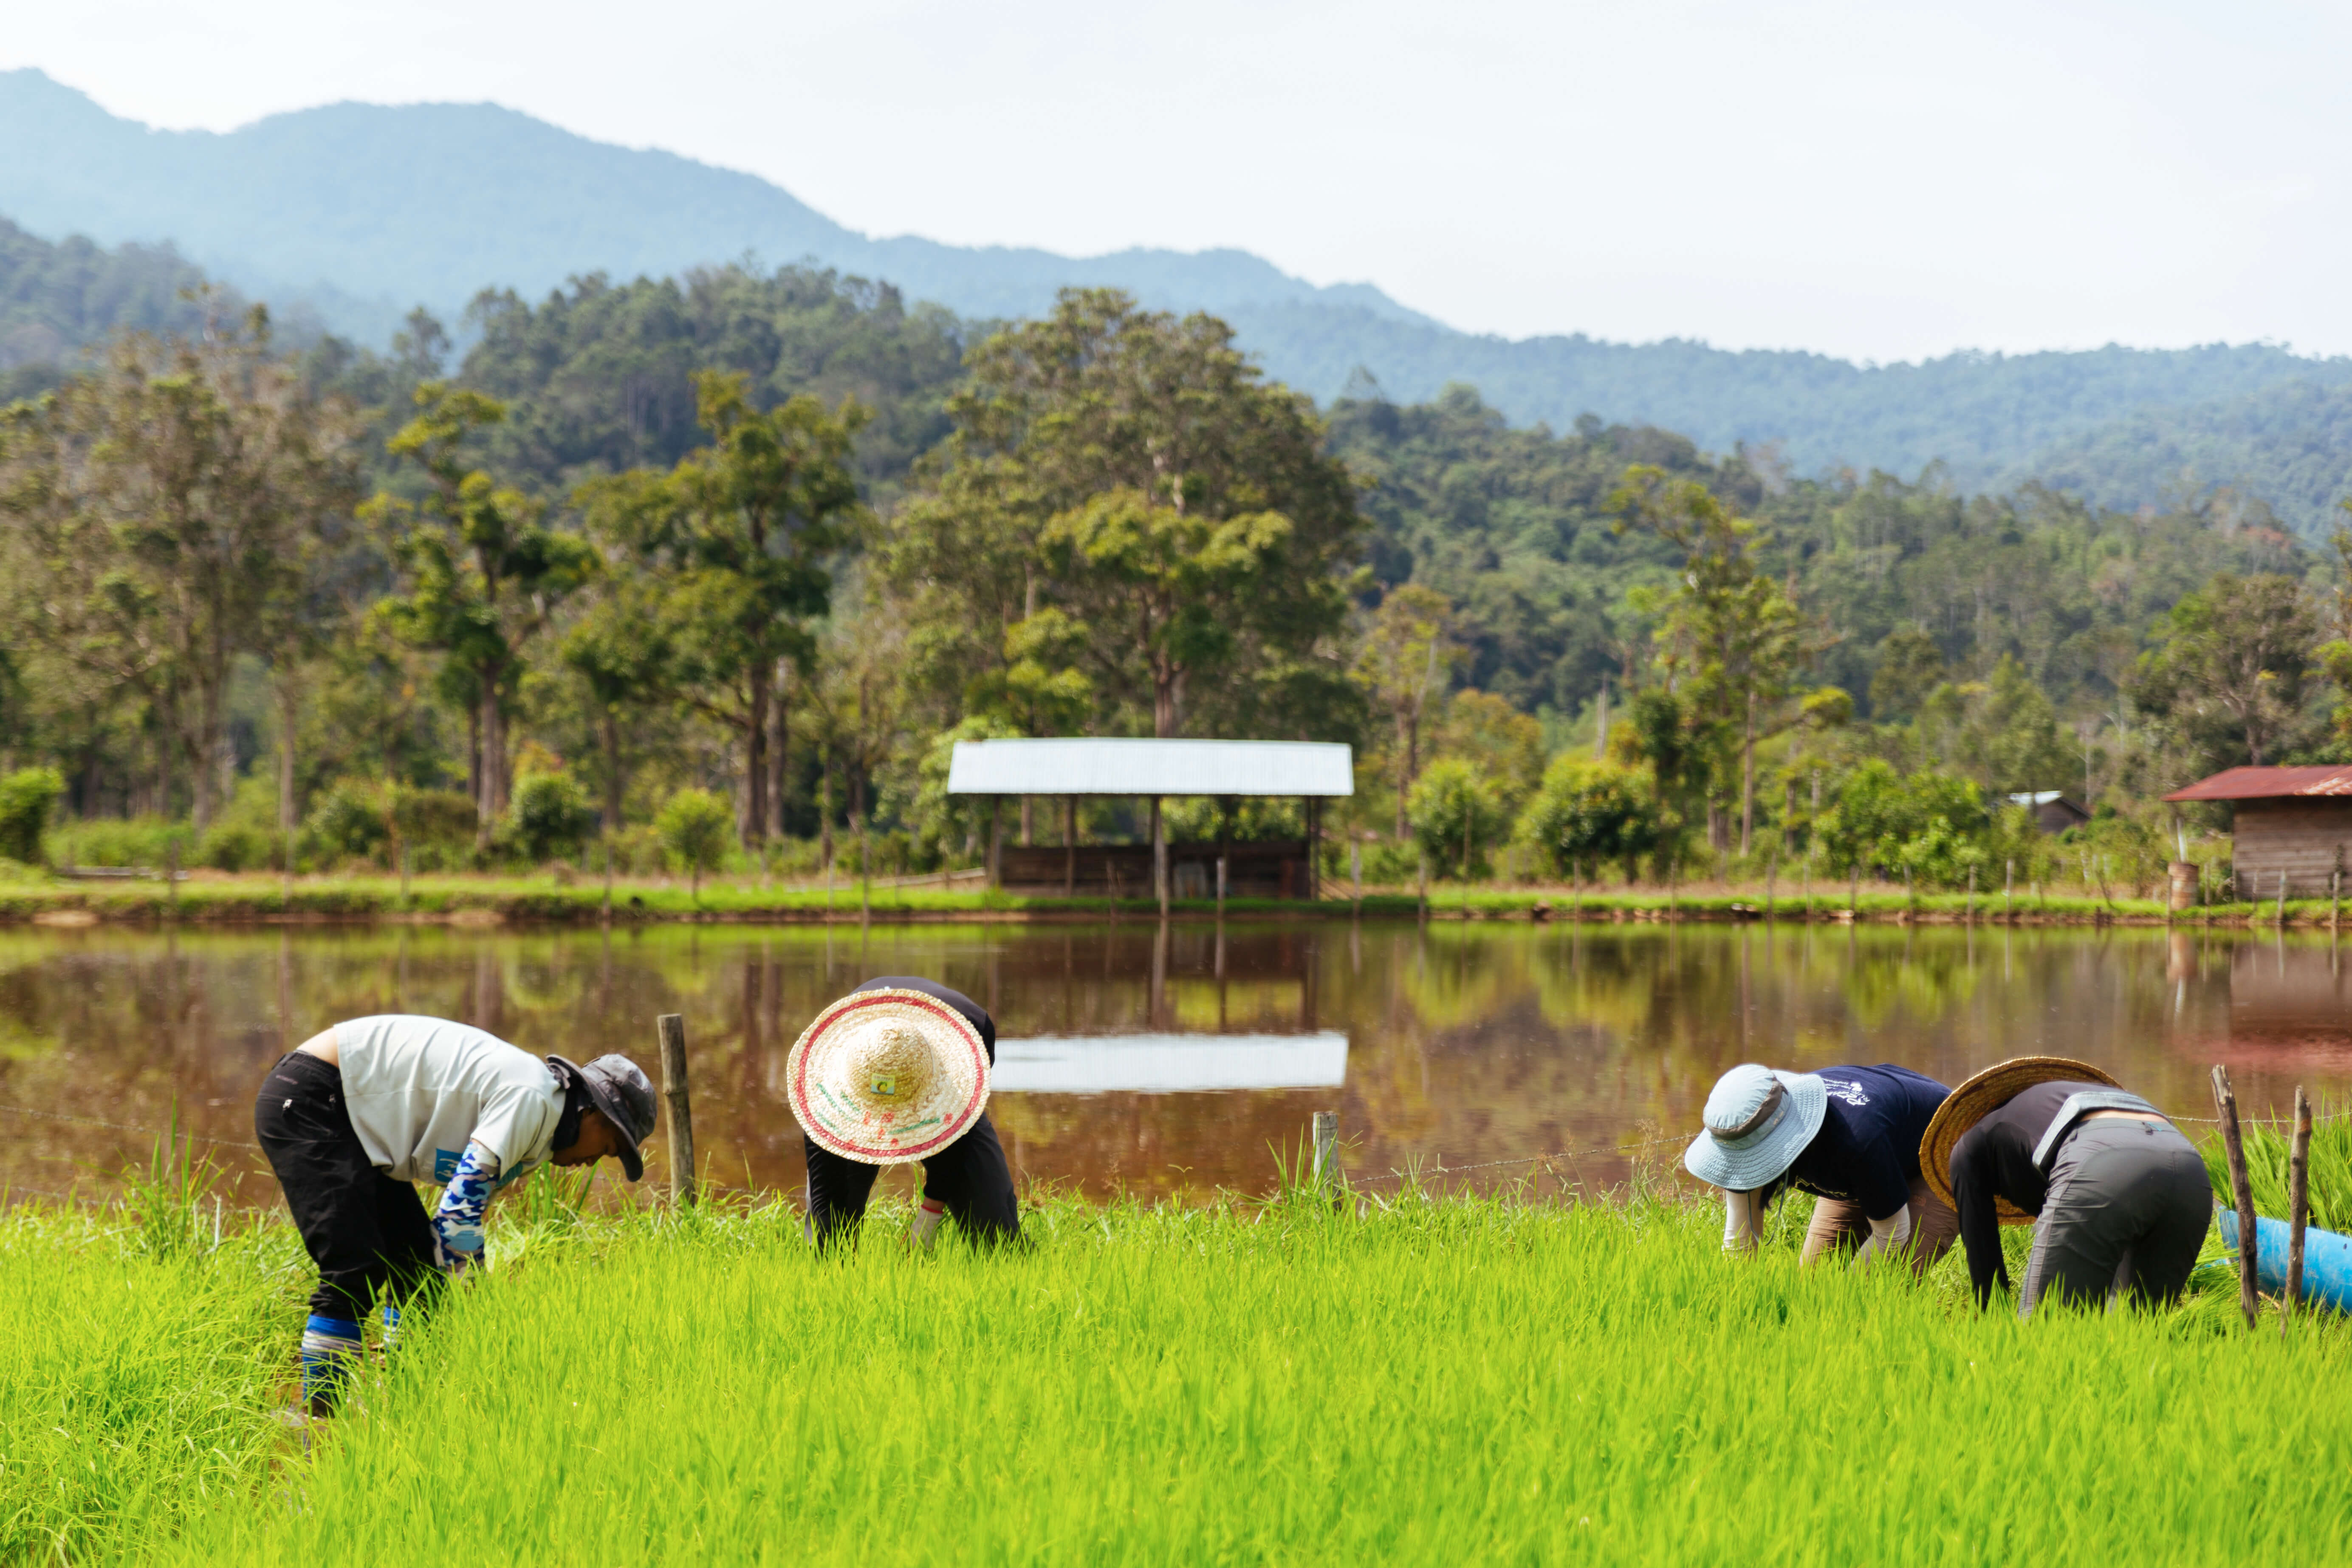 Farmers planting rice in a field, with green seedlings in the foreground, and a submerged paddy field in the background, reflecting the surrounding landscape of farms and mountains.